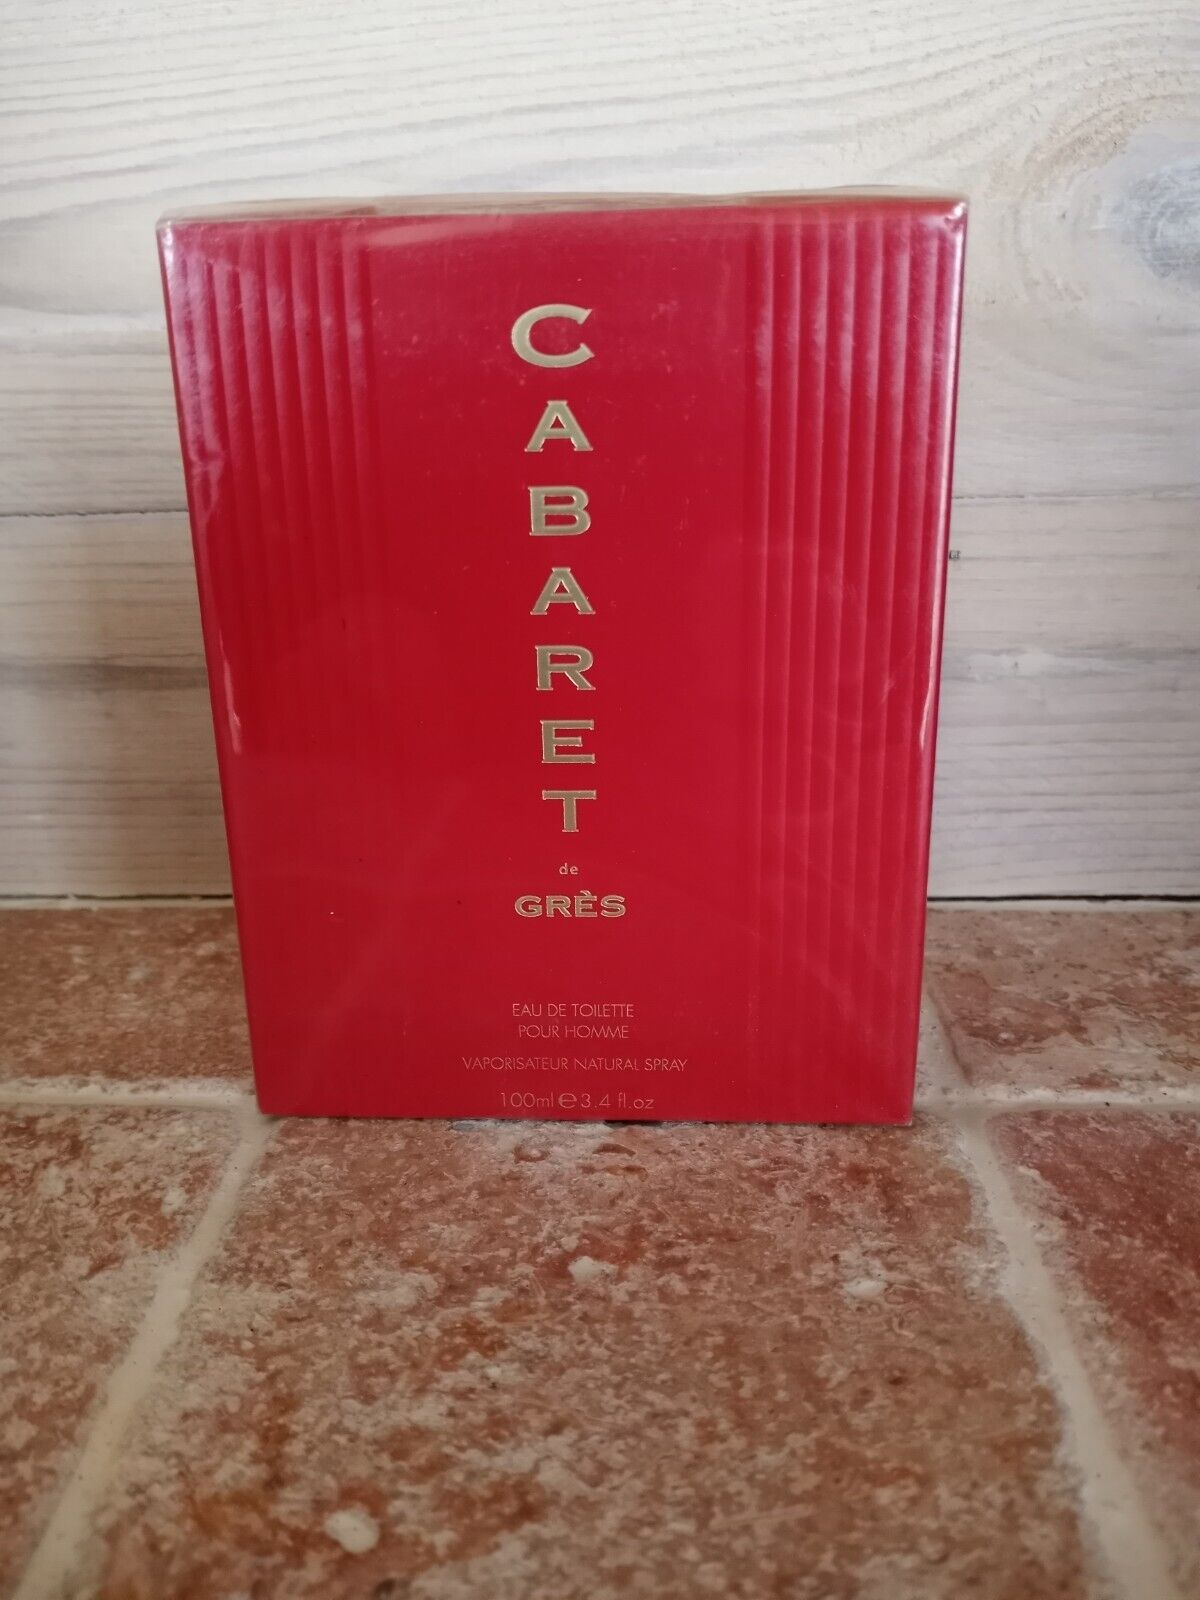 CABARET de GRES POUR HOMME EDT 100ml., DISCONTINUED, VERY RARE, NEW, SEALED